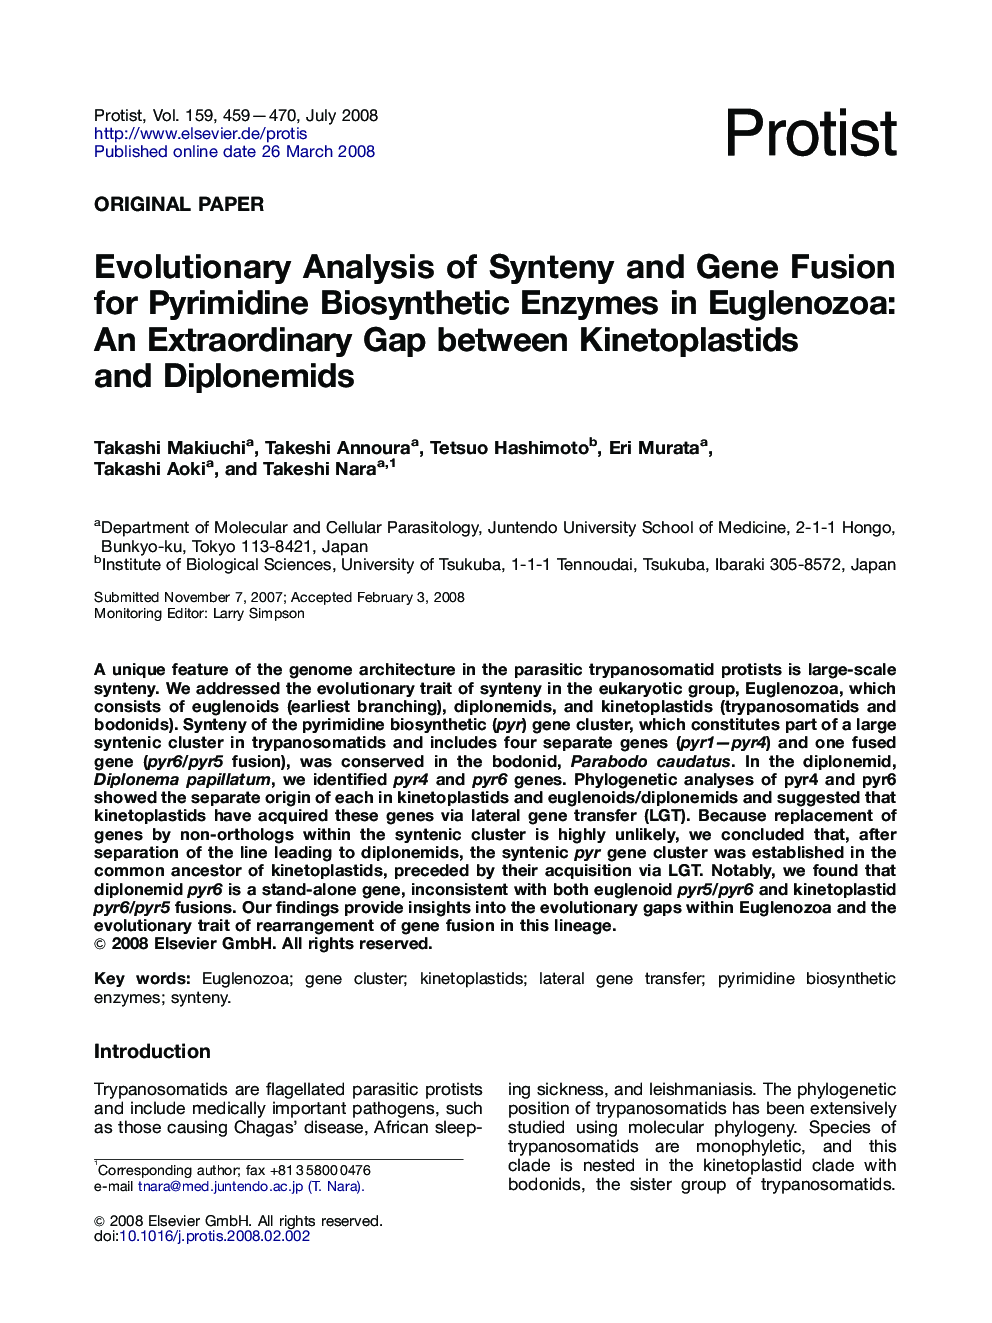 Evolutionary Analysis of Synteny and Gene Fusion for Pyrimidine Biosynthetic Enzymes in Euglenozoa: An Extraordinary Gap between Kinetoplastids and Diplonemids